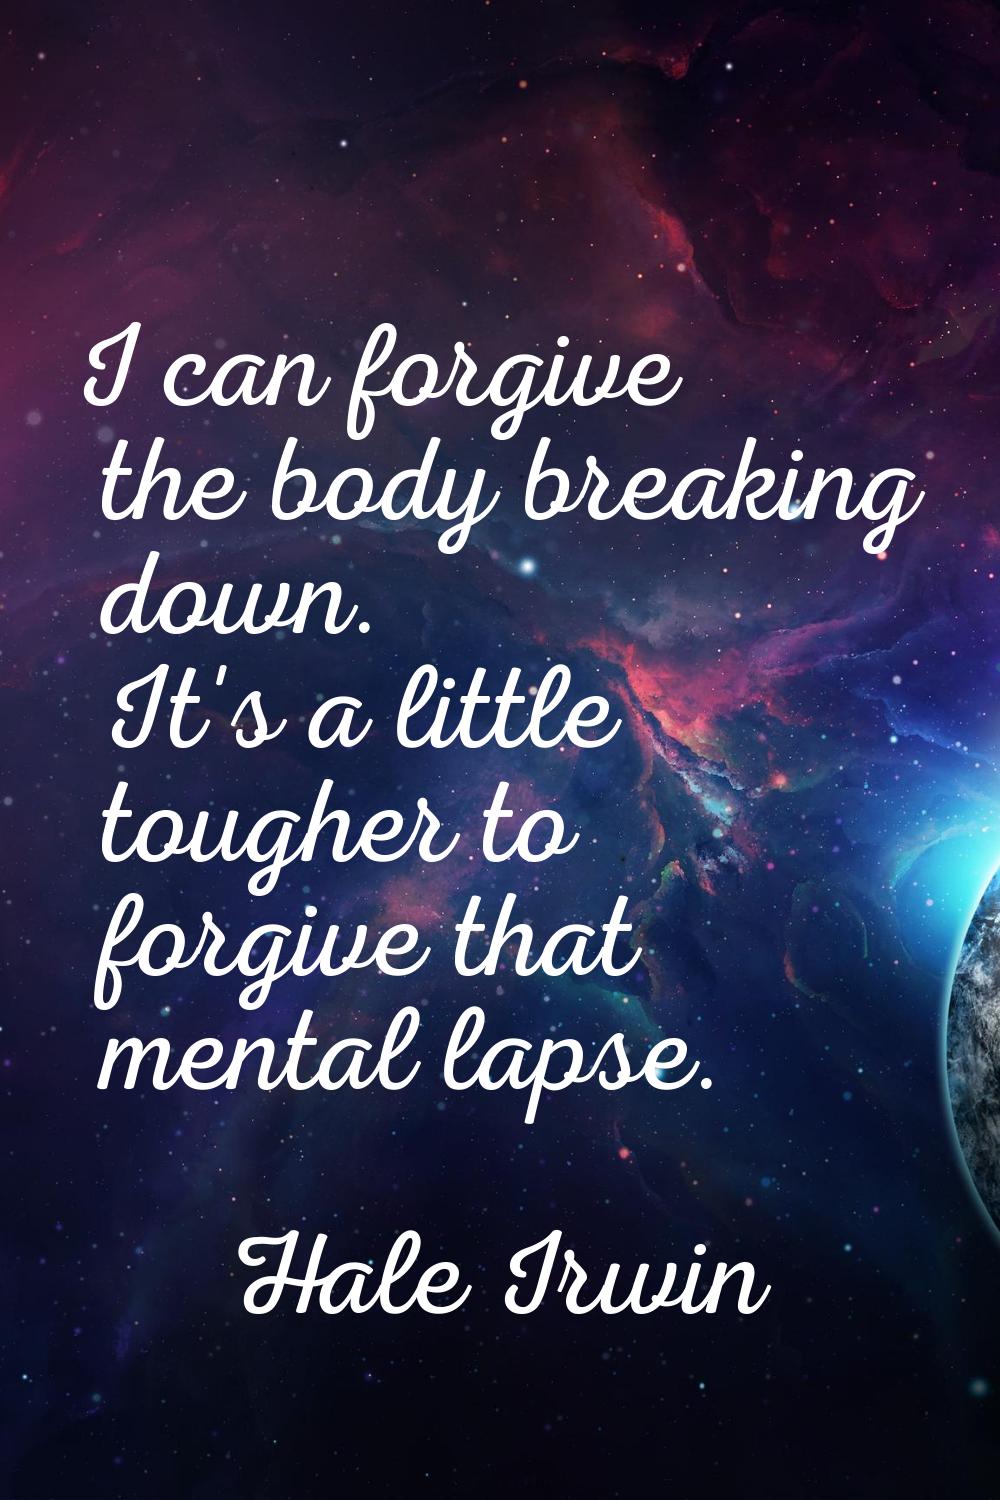 I can forgive the body breaking down. It's a little tougher to forgive that mental lapse.